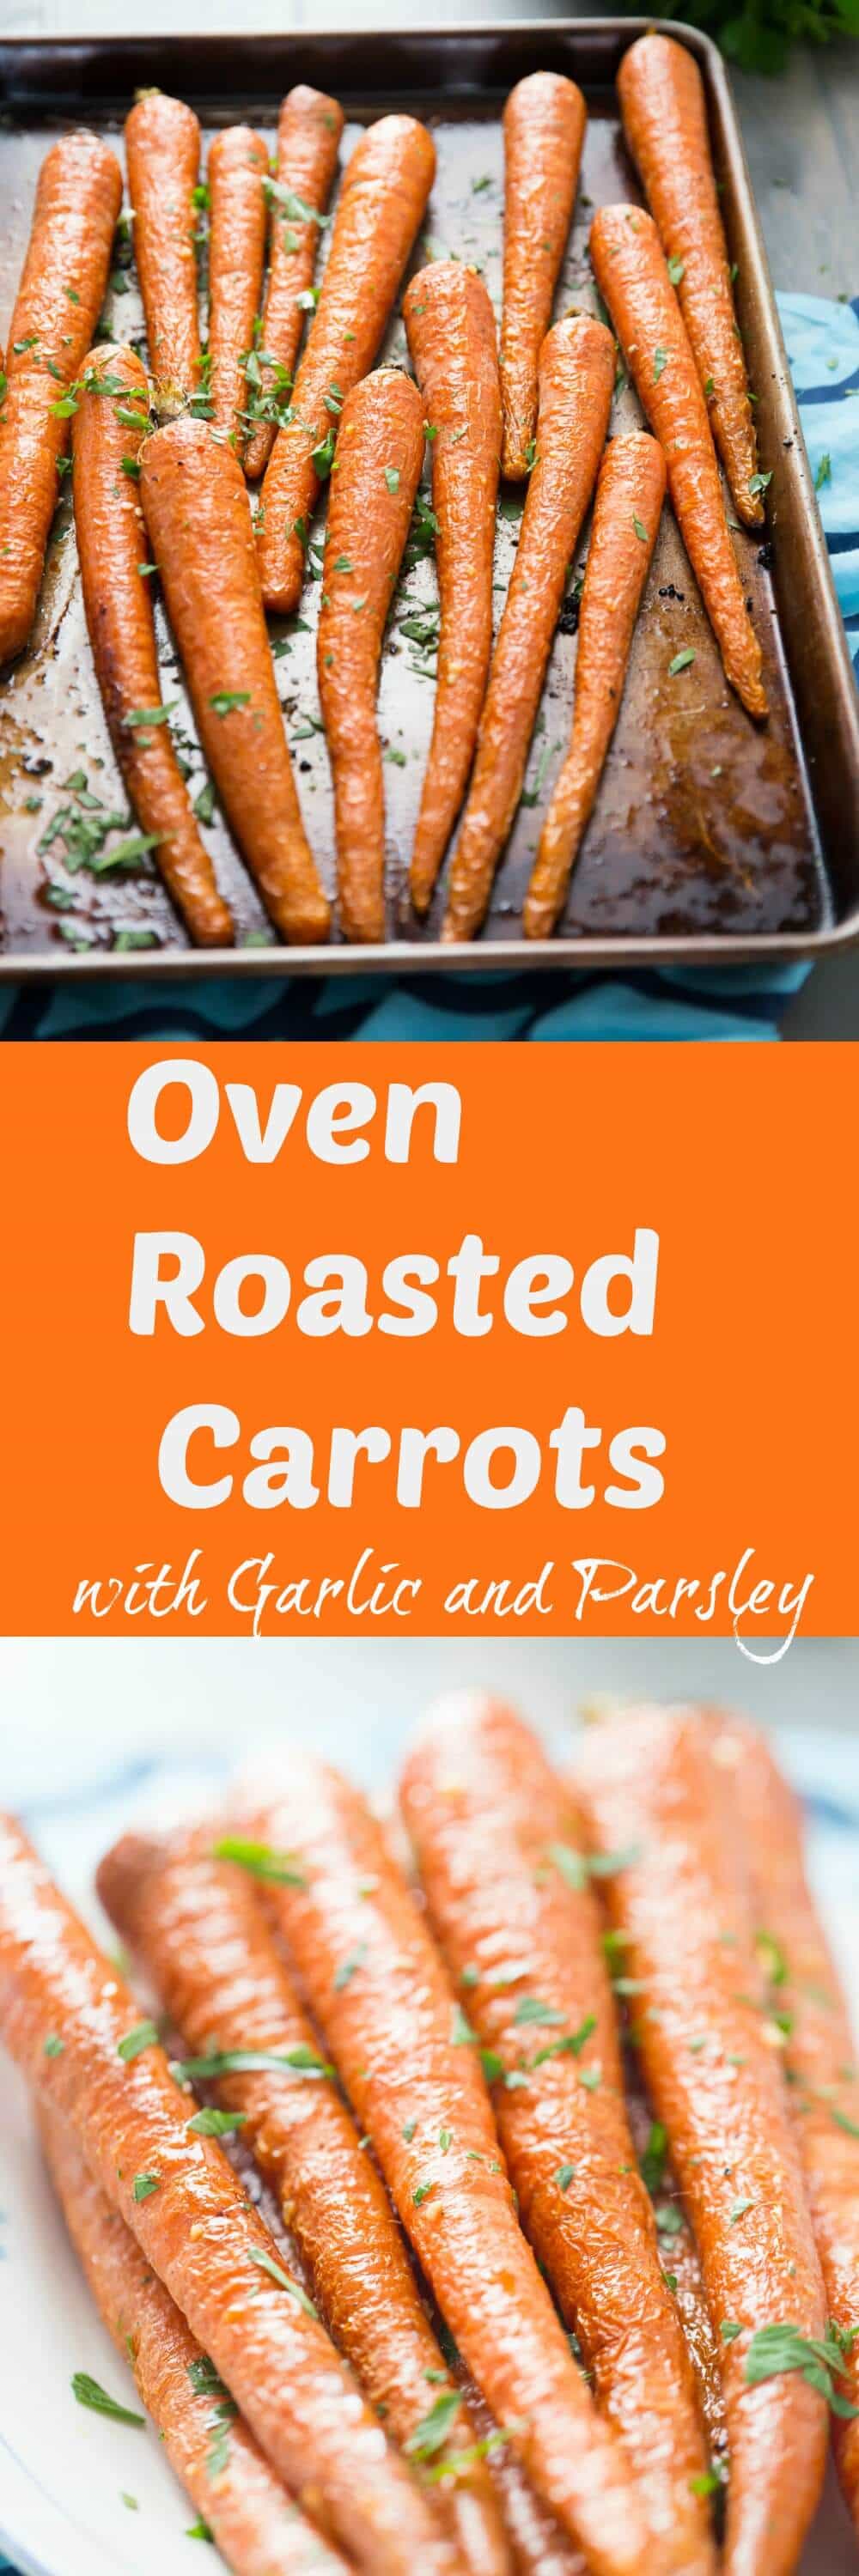 Garlic and parsley coated oven roasted carrots are such a great side dish for holiday or any day! They roast up soft, sweet and tender; you are going to love them!